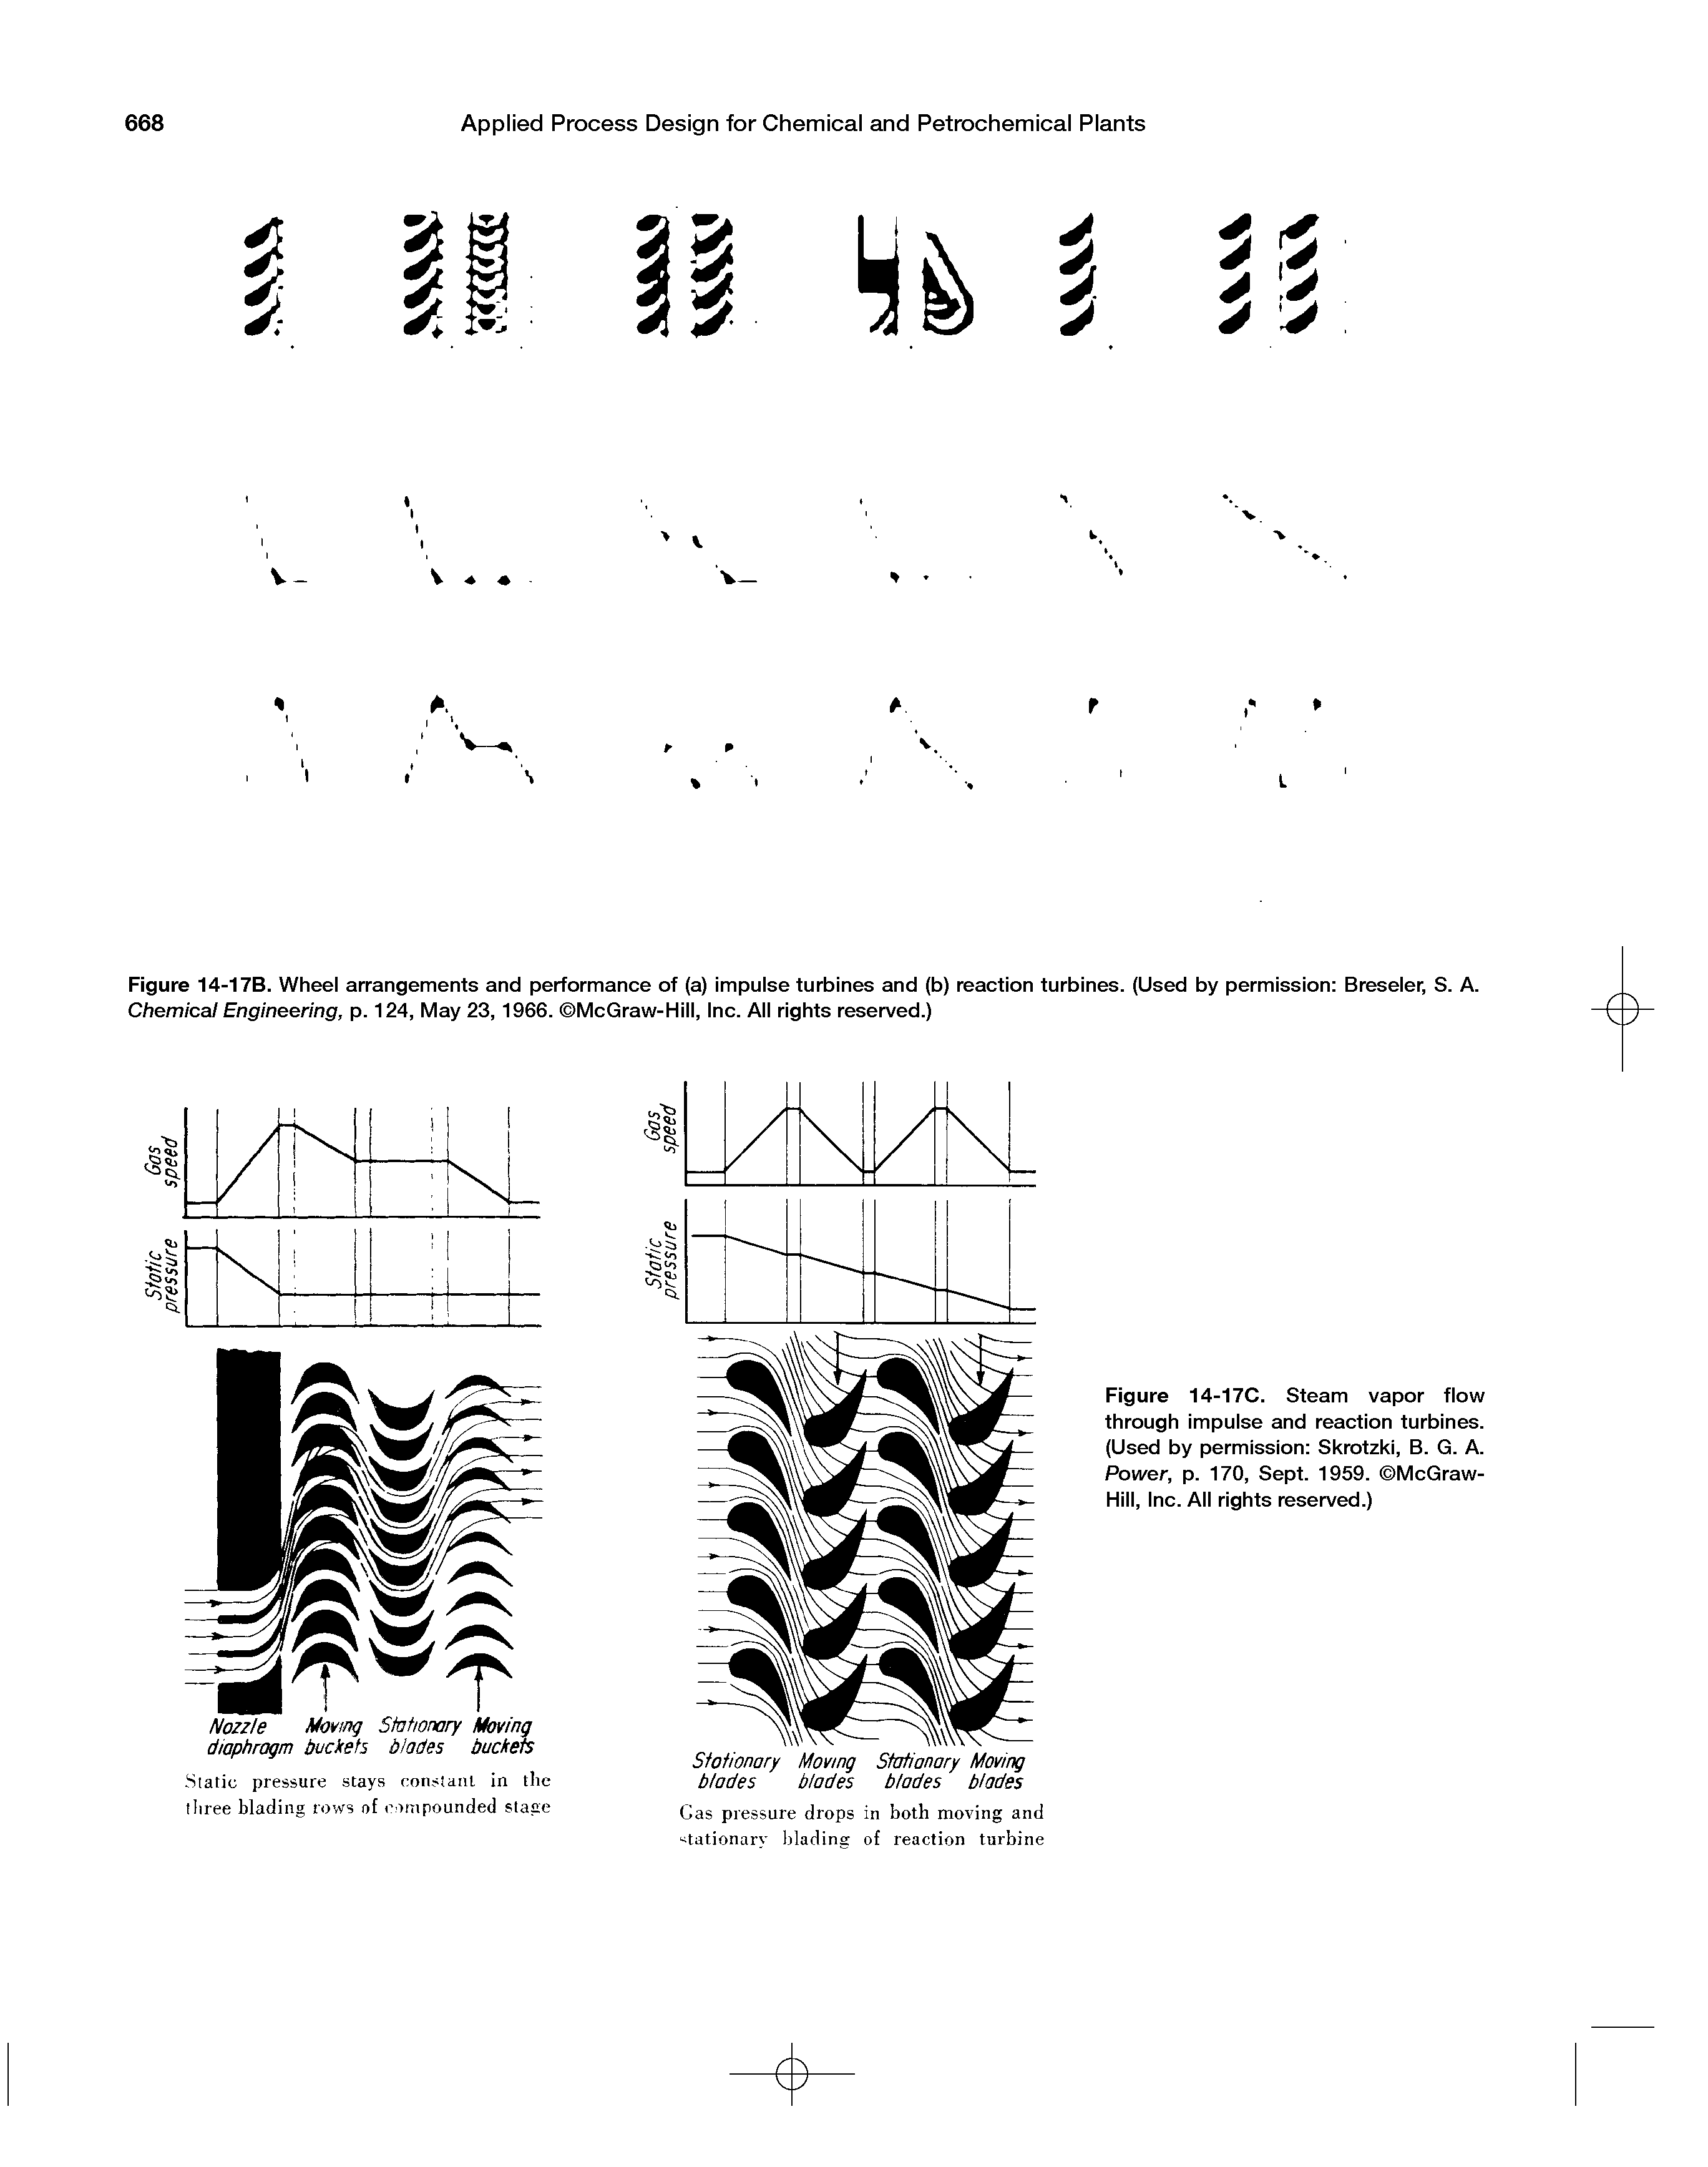 Figure 14-17C. Steam vapor flow through impulse and reaction turbines. (Used by permission Skrotzki, B. G. A. Power, p. 170, Sept. 1959. McGraw-Hill, Inc. All rights reserved.)...